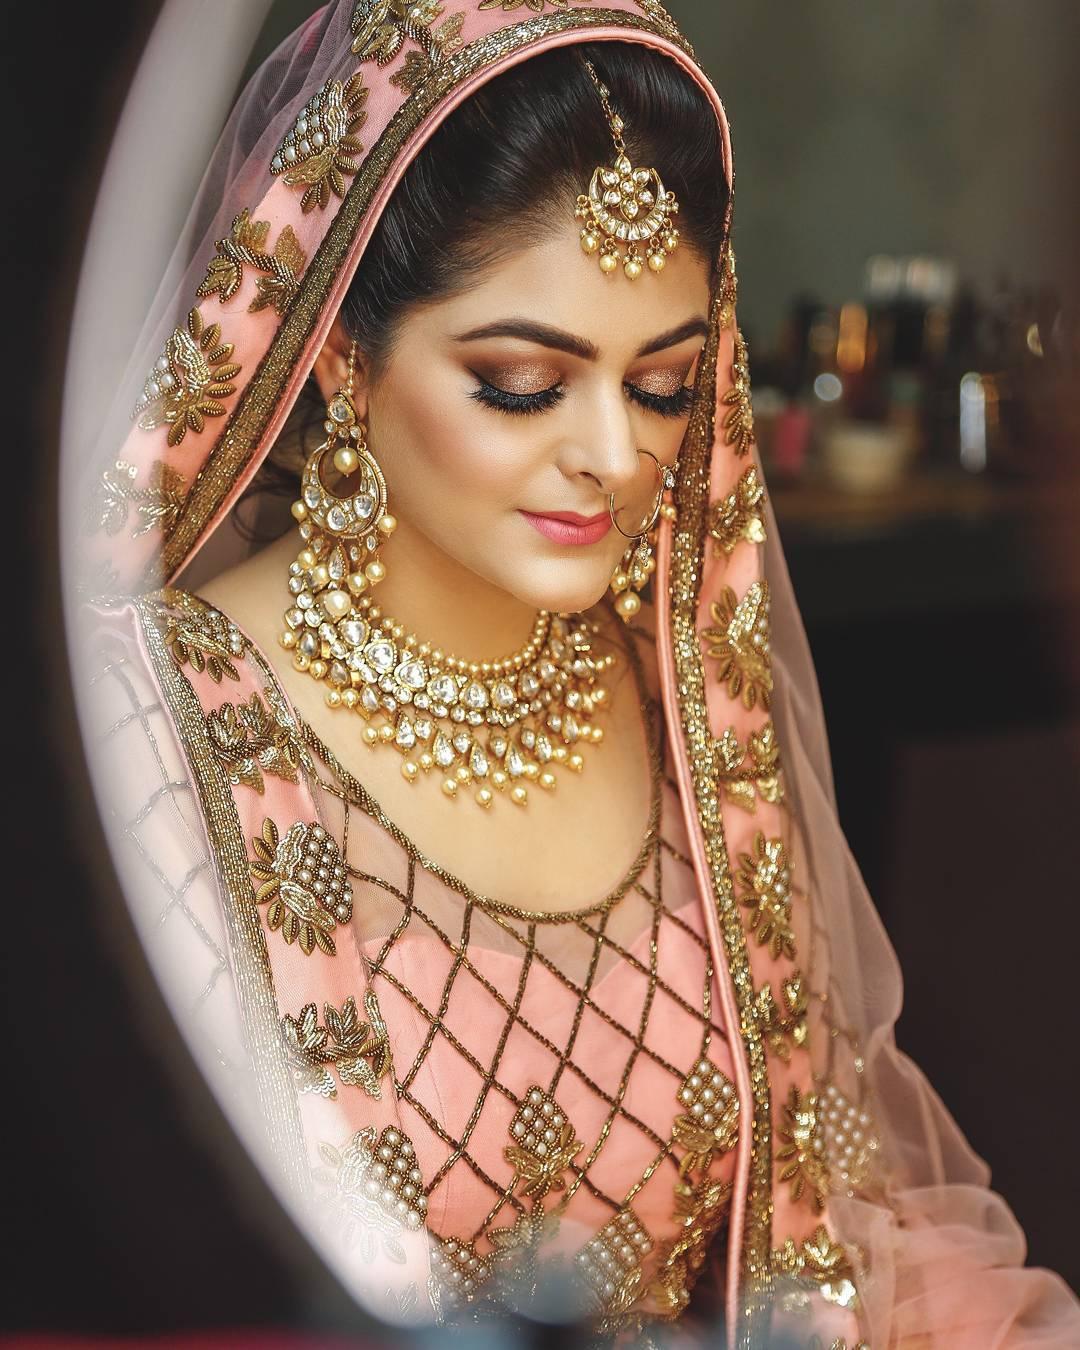 Indian Wedding outfit | Bridal portrait poses, Bridal photography poses, Indian  bride poses